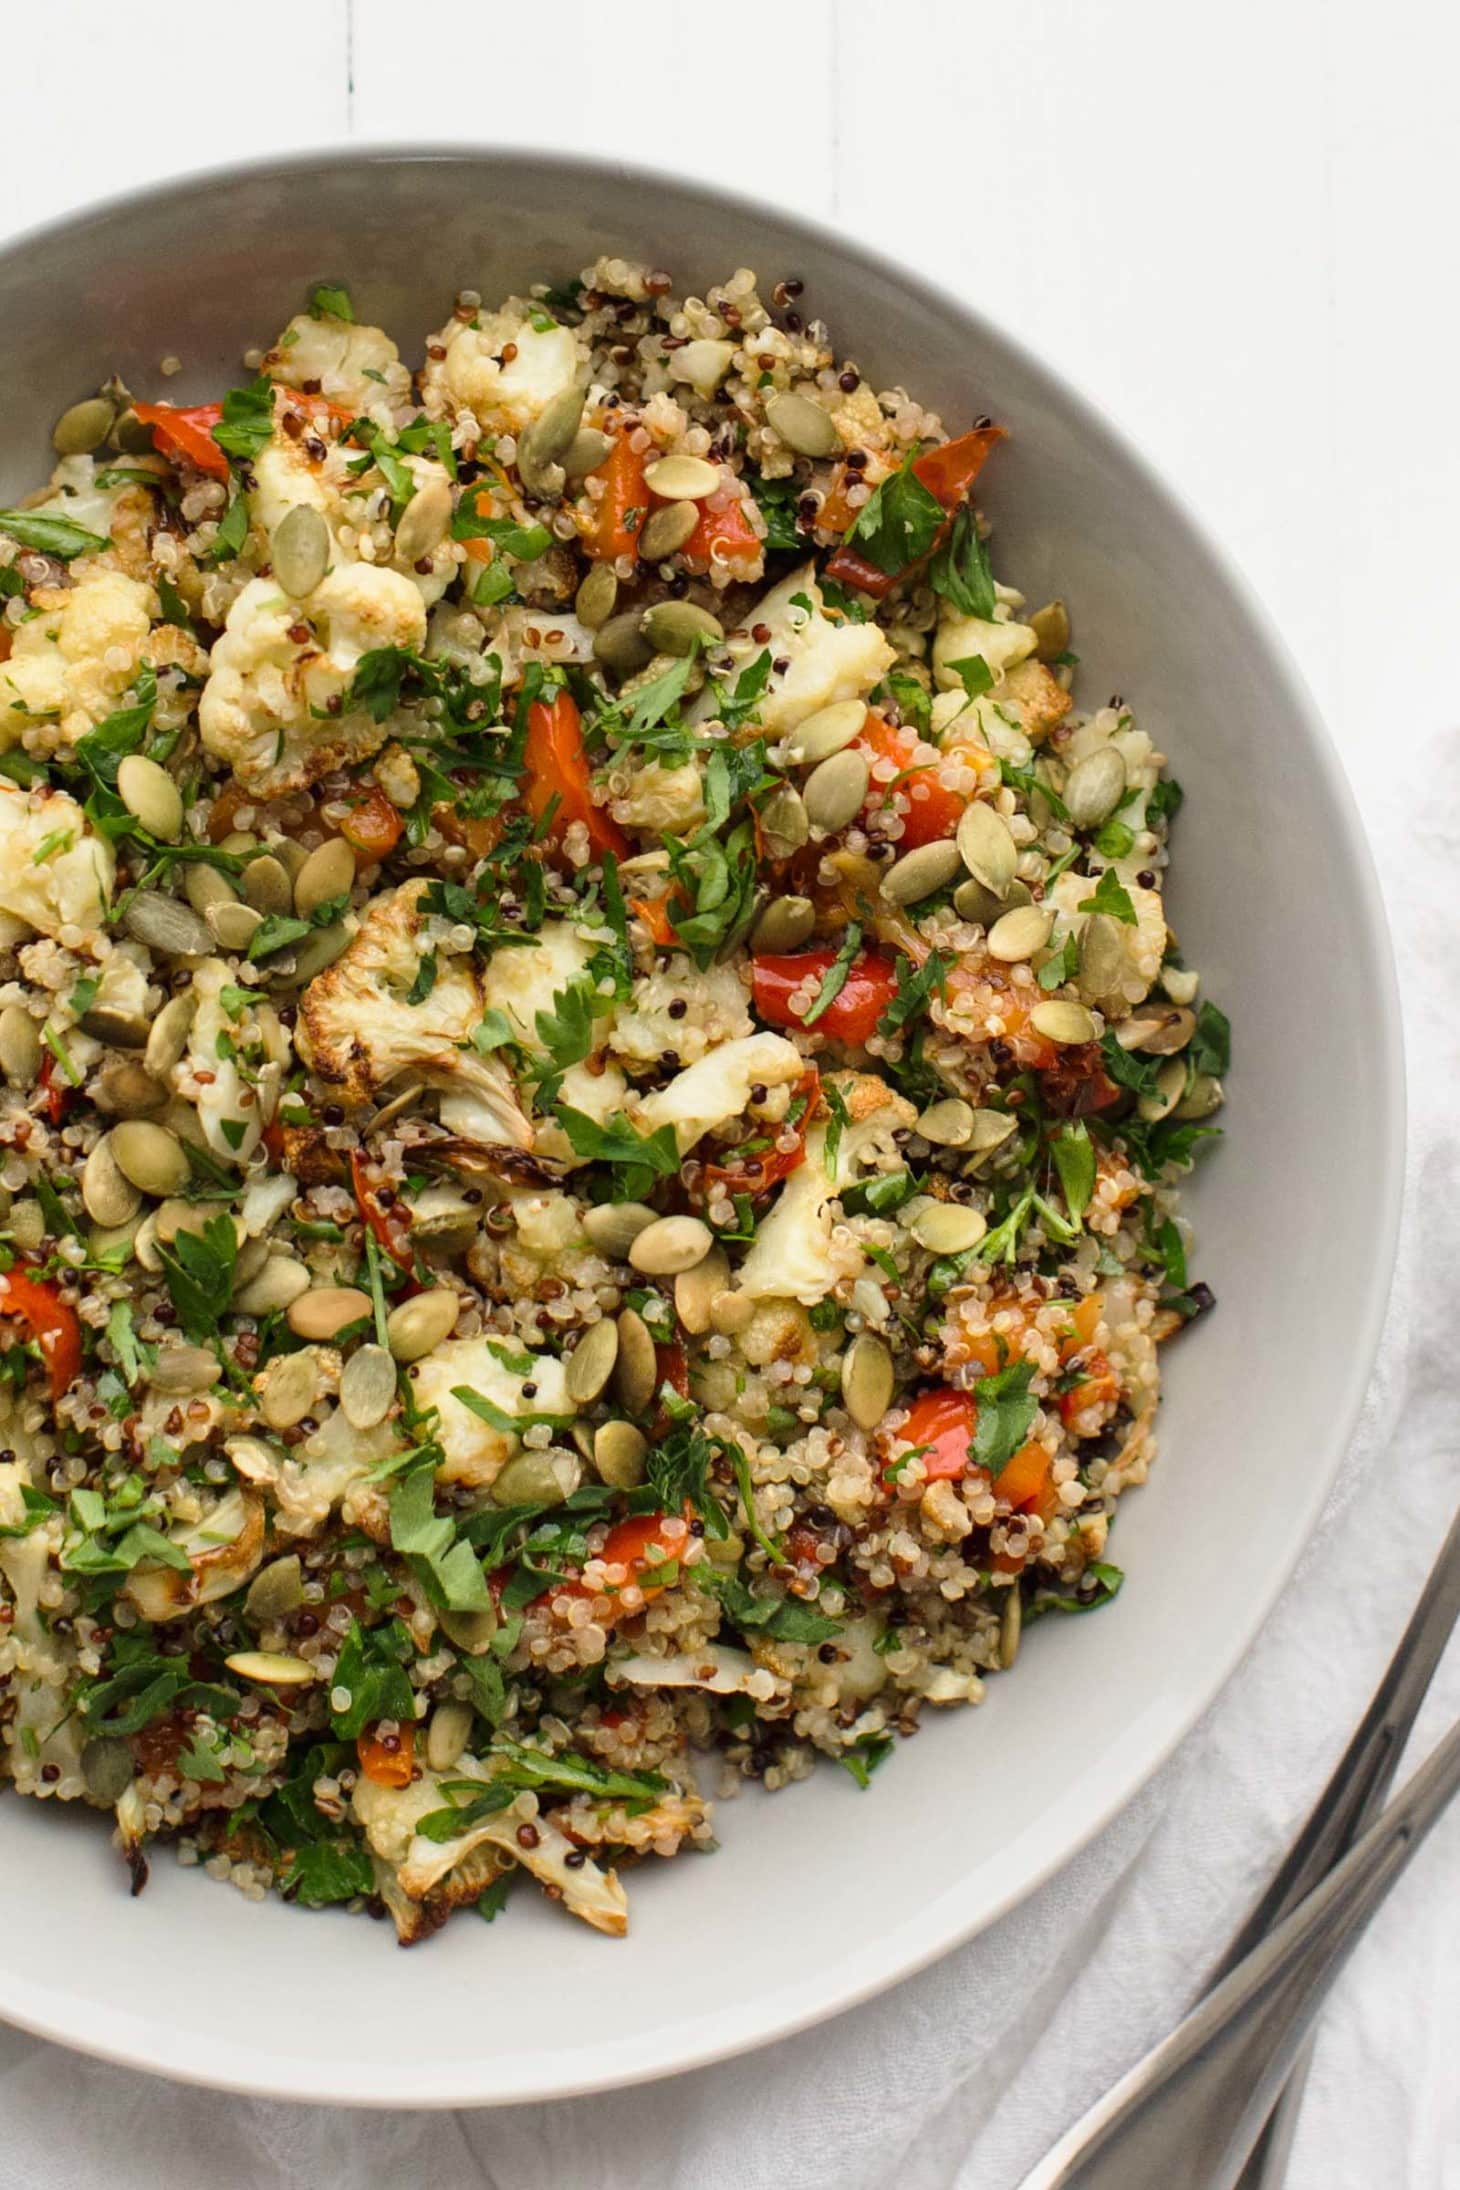 Caramelized Cauliflower Salad with Quinoa and Roasted Red Pepper